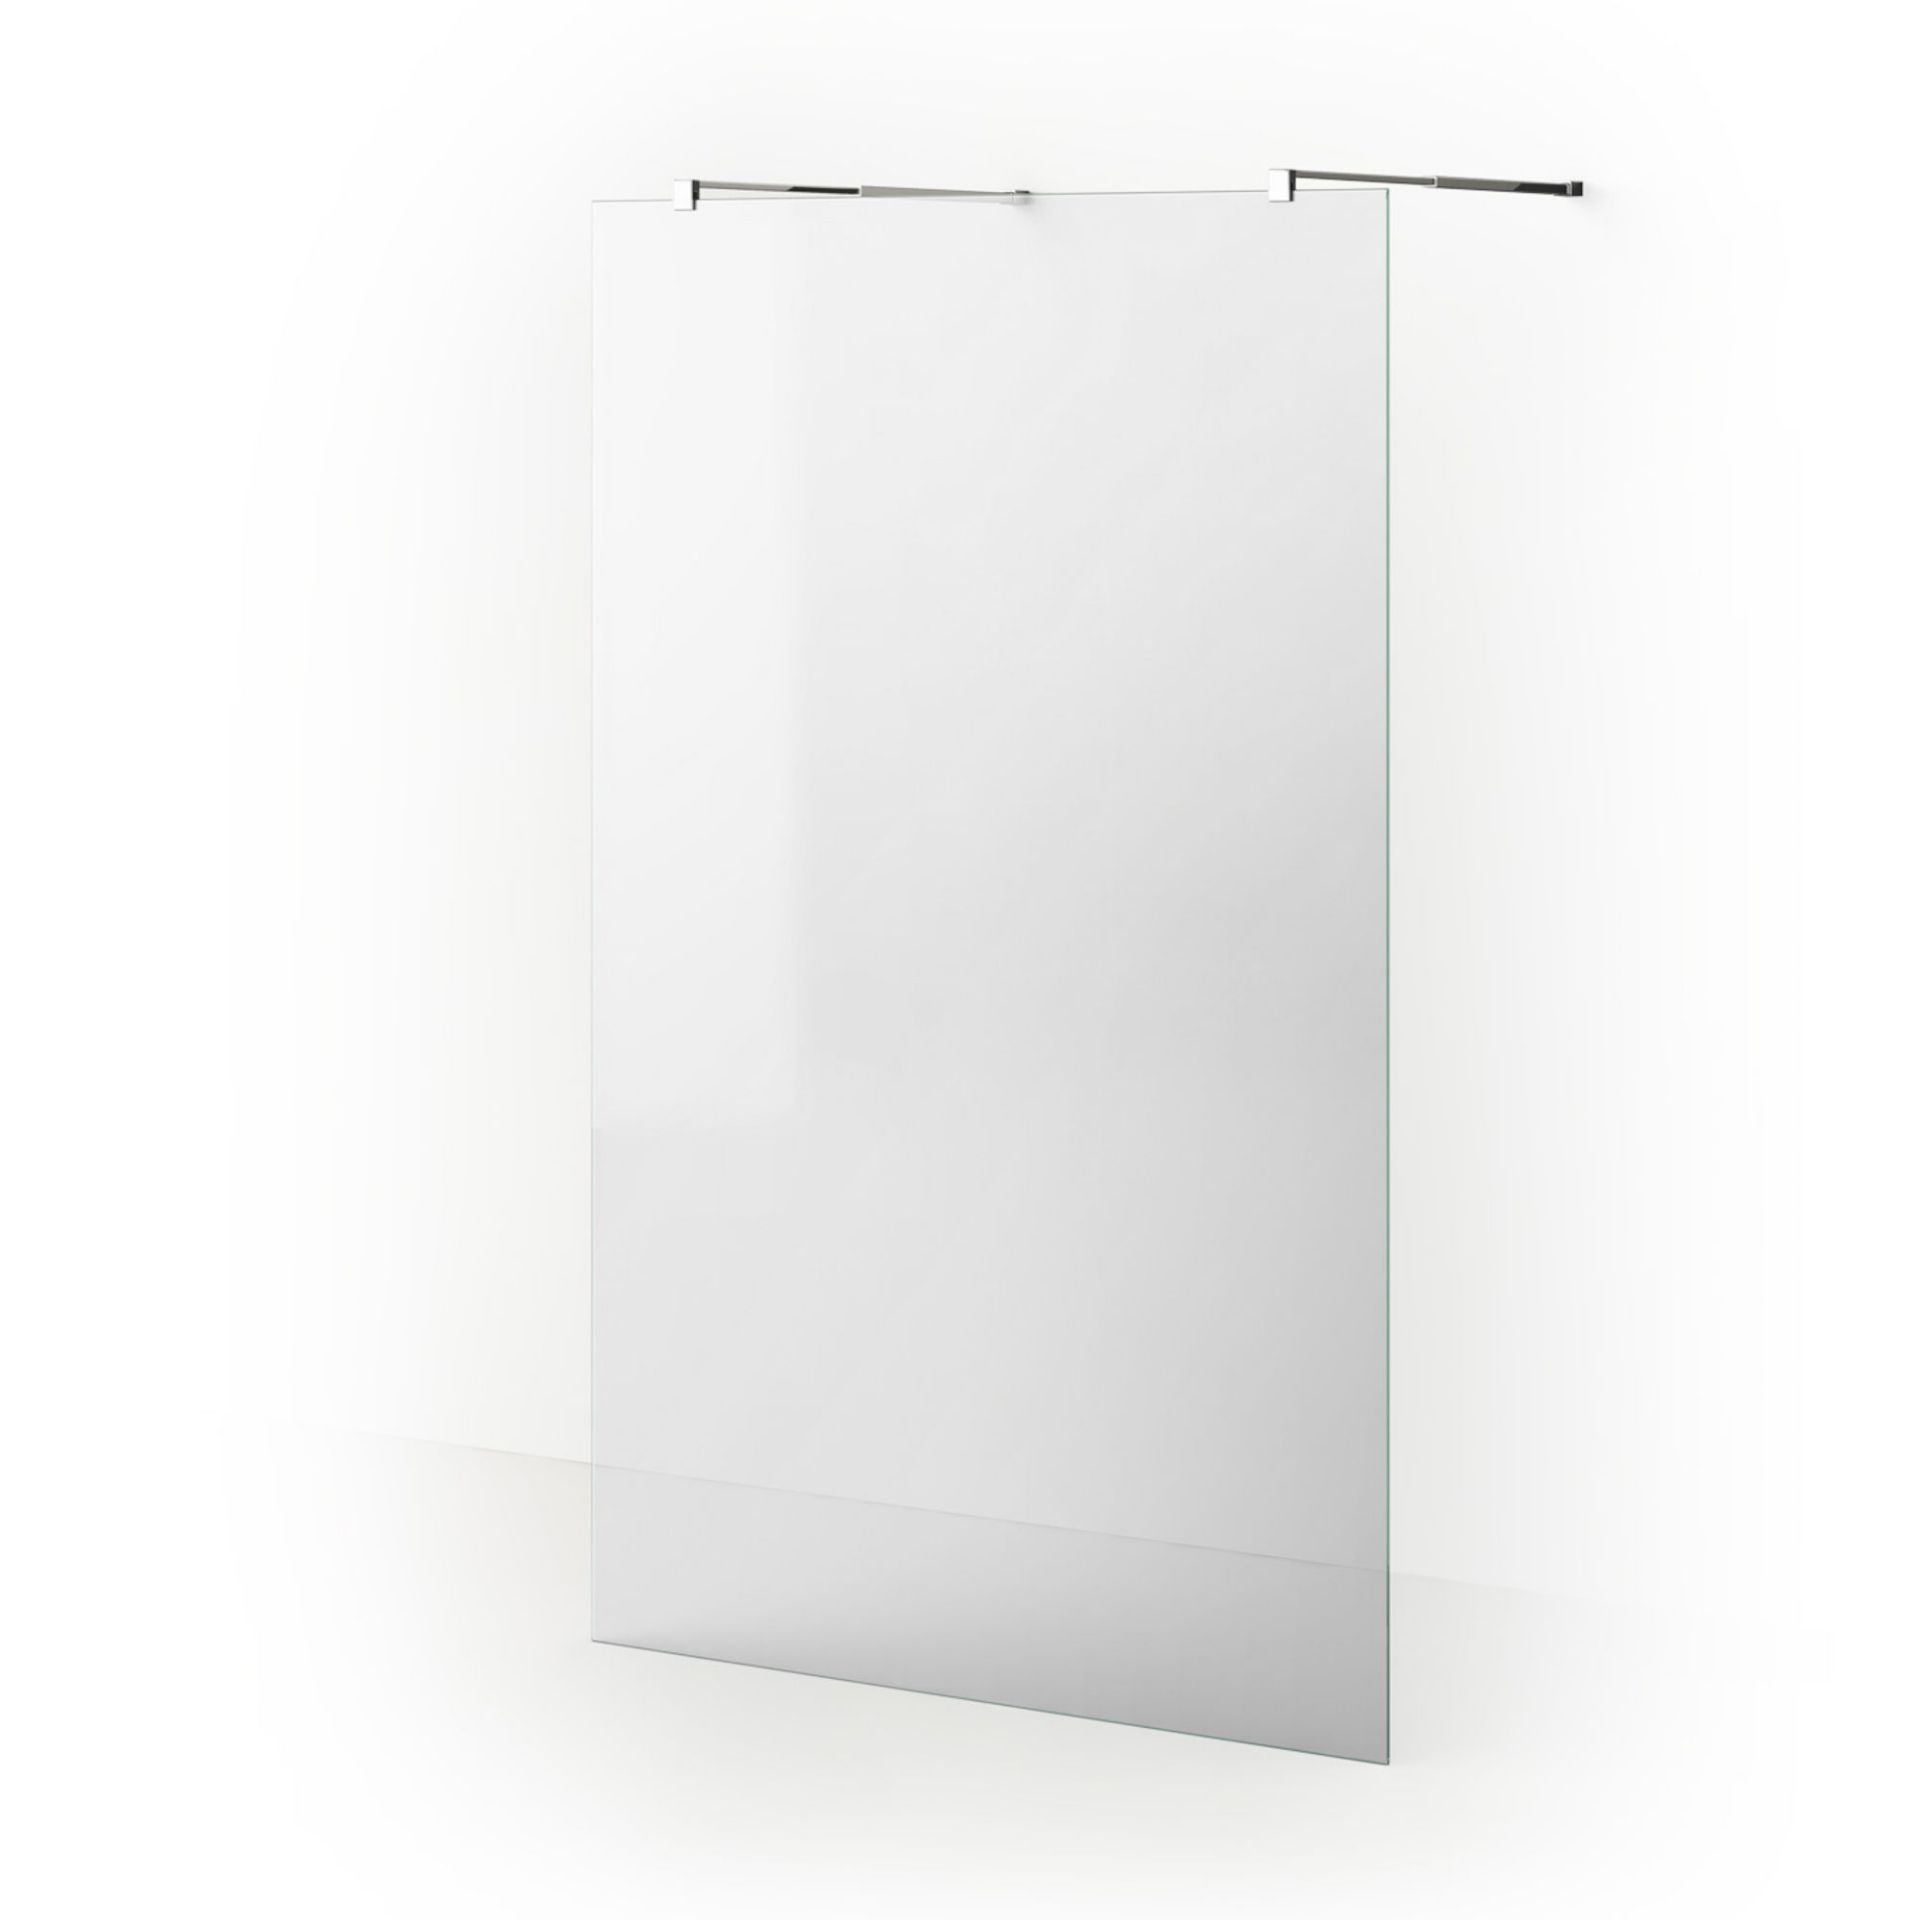 (QW102) 1200mm - 8mm - Designer EasyClean Walk Through Panel. RRP £499.99. Introducing The Hotel - Image 9 of 10